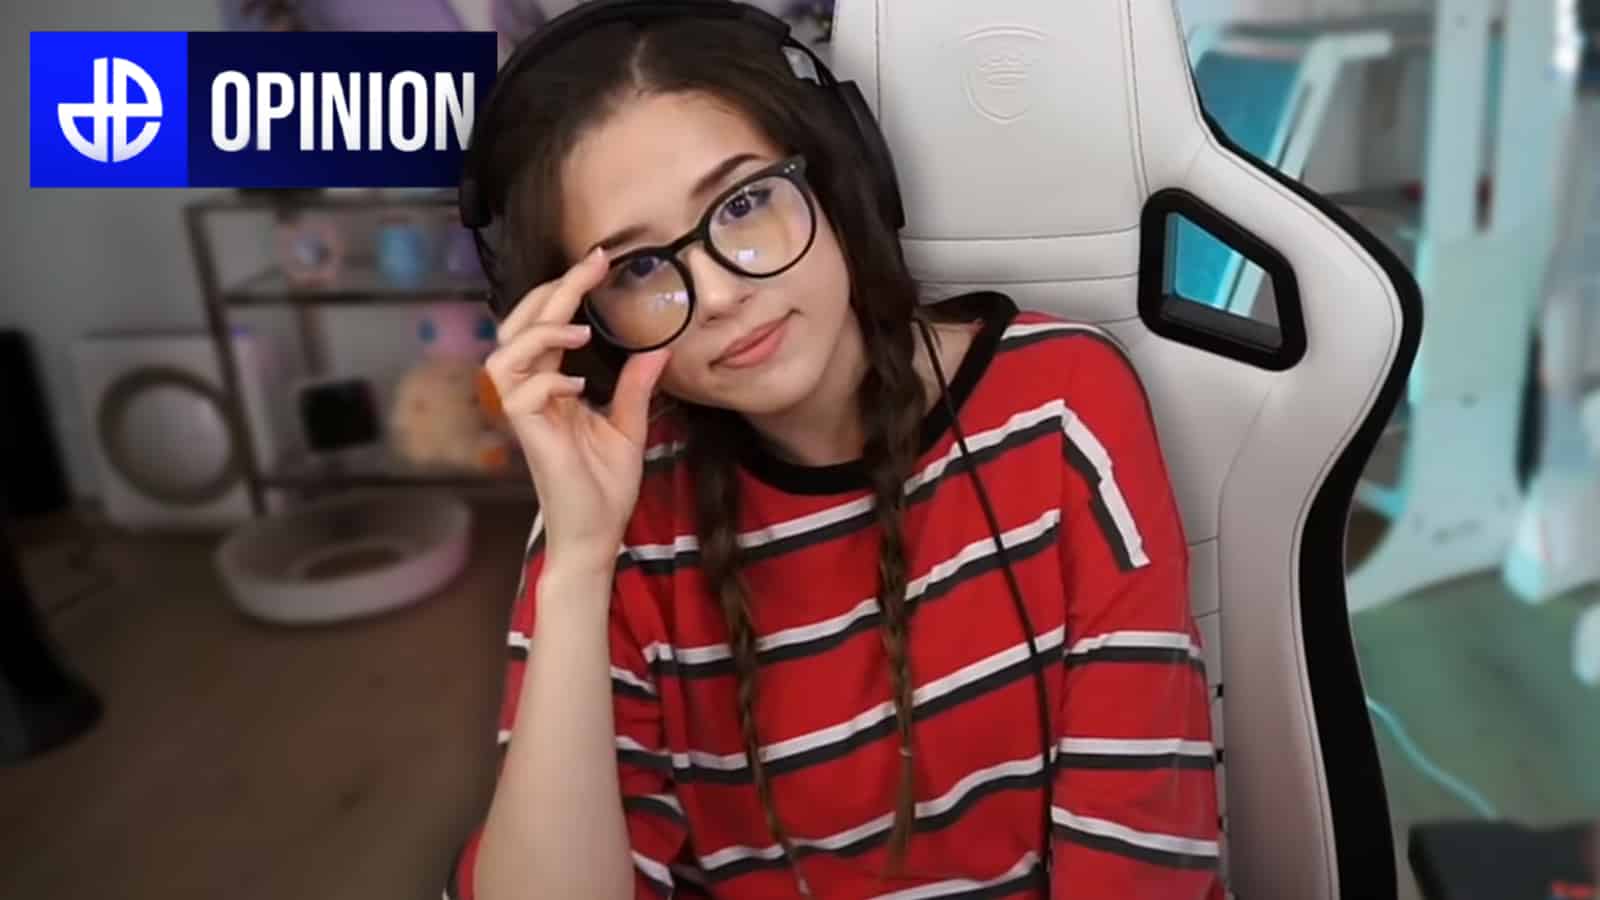 Pokimane on Twitch Safety Policies, Favorite Games and Film Debut